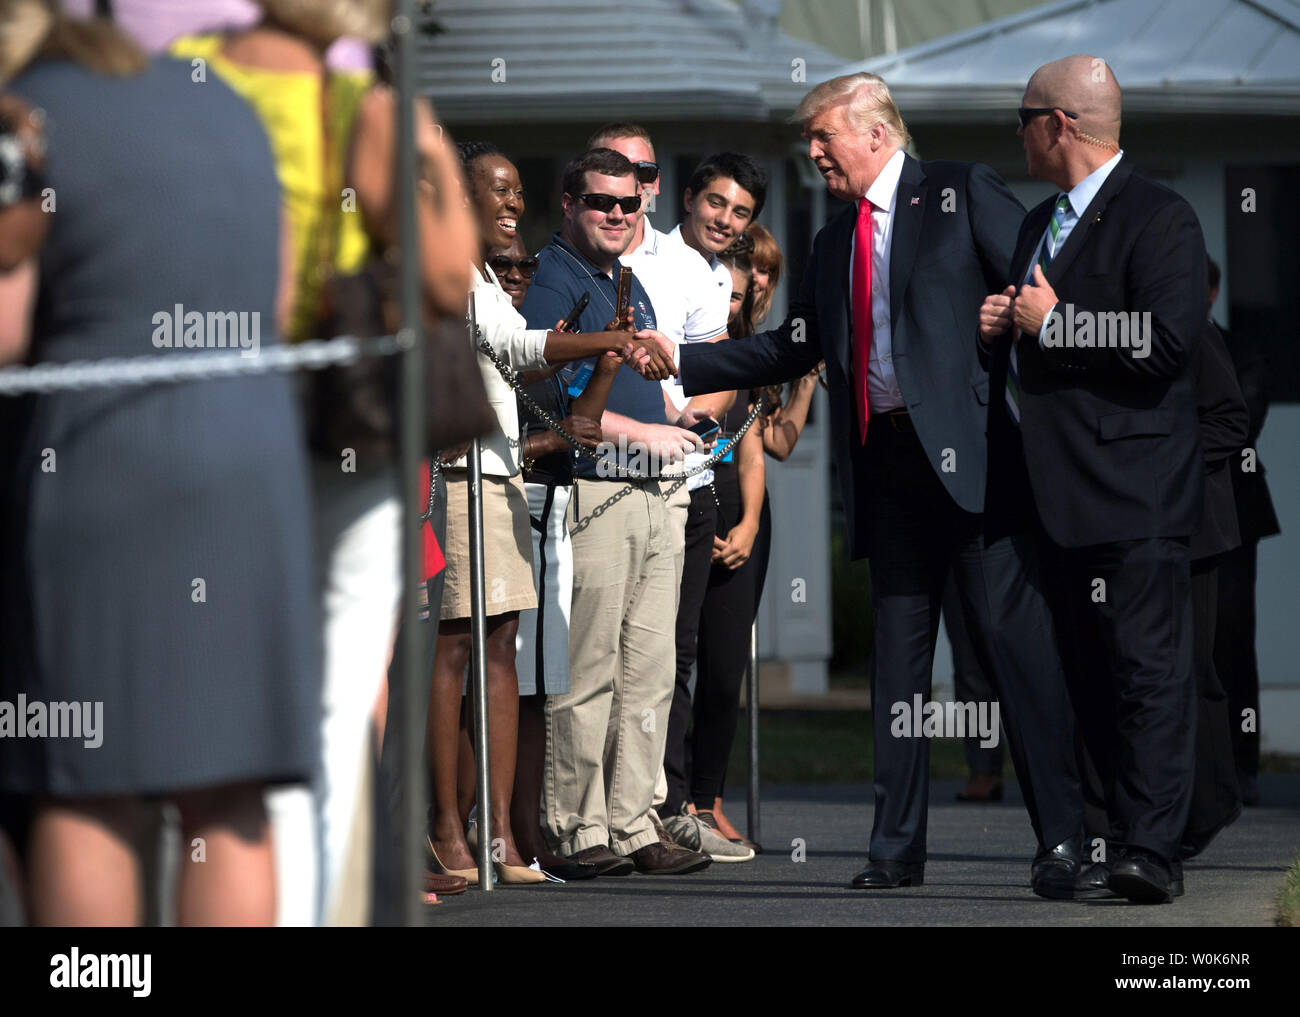 President Donald Trump greets White House guests as he makes his way to Marine One as he travels to Indiana for a rally, on the South Lawn of the White House in Washington, D.C. on August 30, 2018. Photo by Kevin Dietsch/UPI Stock Photo